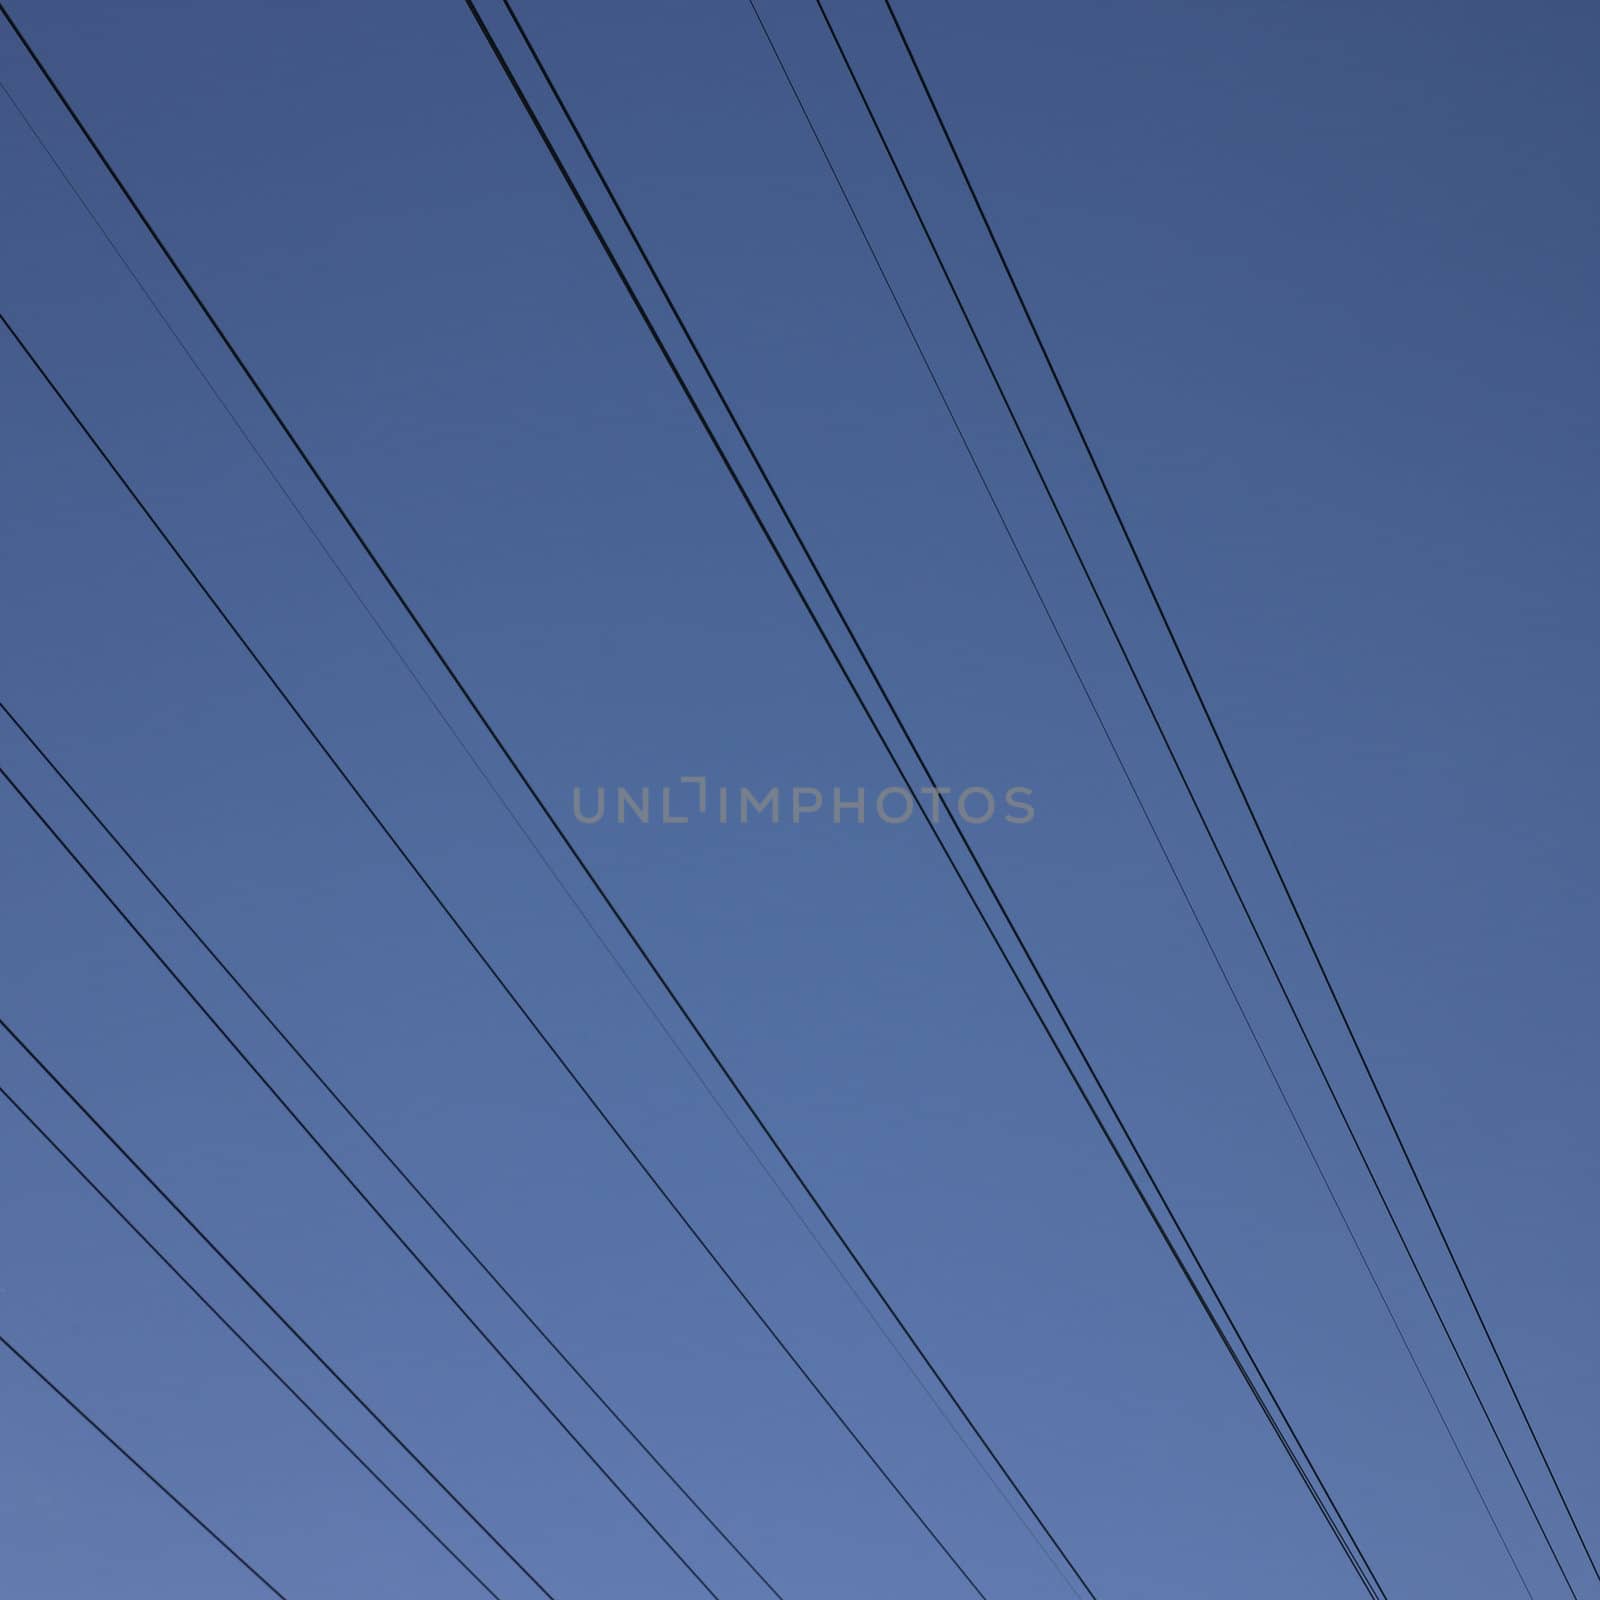 black electric wires in the blue sky